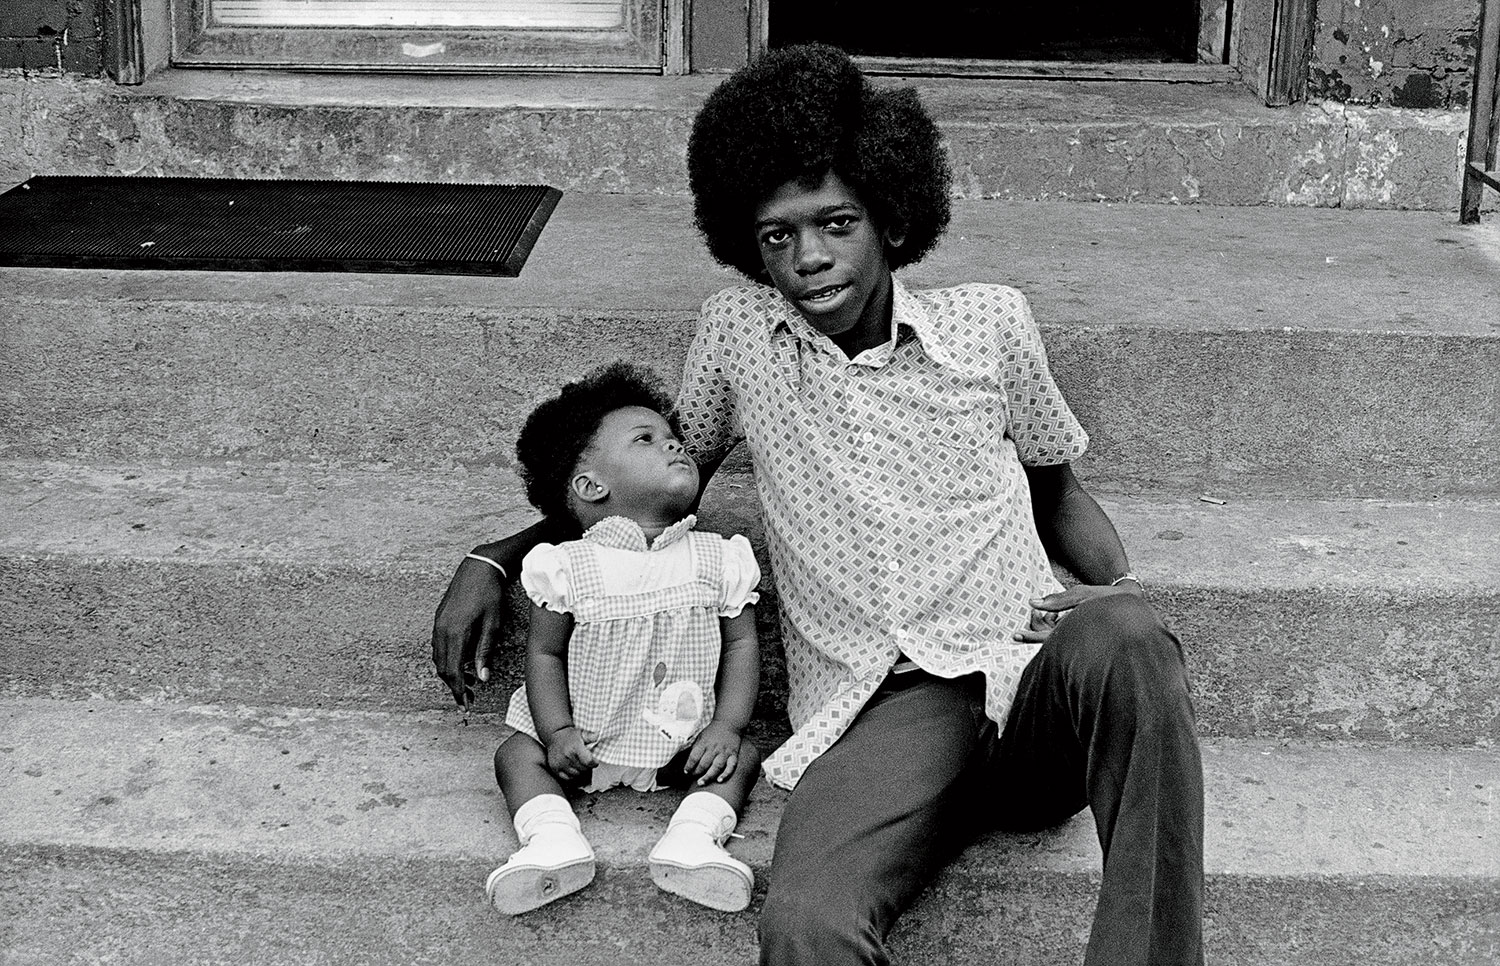 A 1974 photo of a young man and a baby sitting on the steps of a Chicago Avenue building.